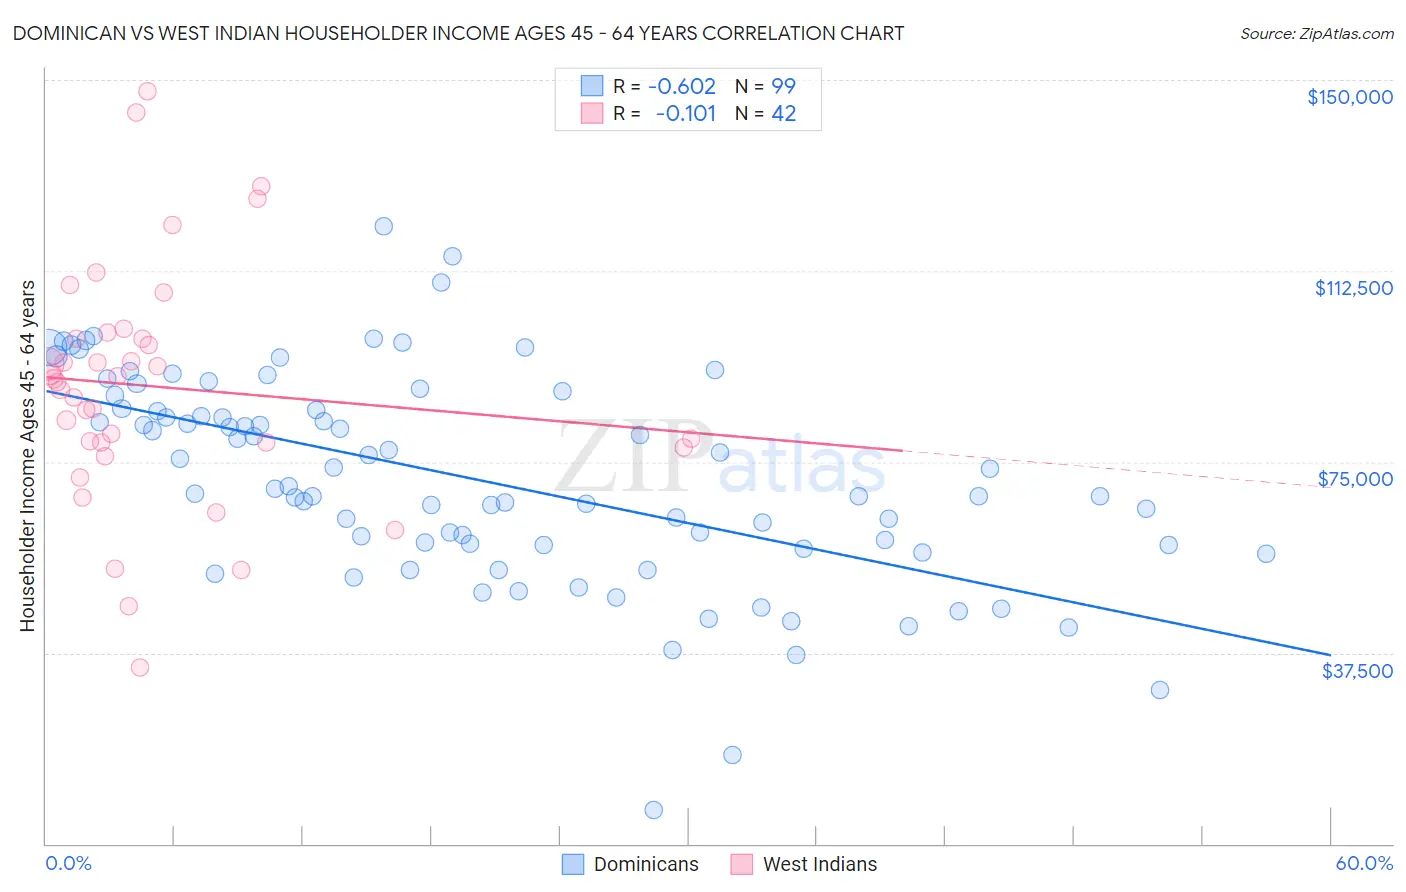 Dominican vs West Indian Householder Income Ages 45 - 64 years